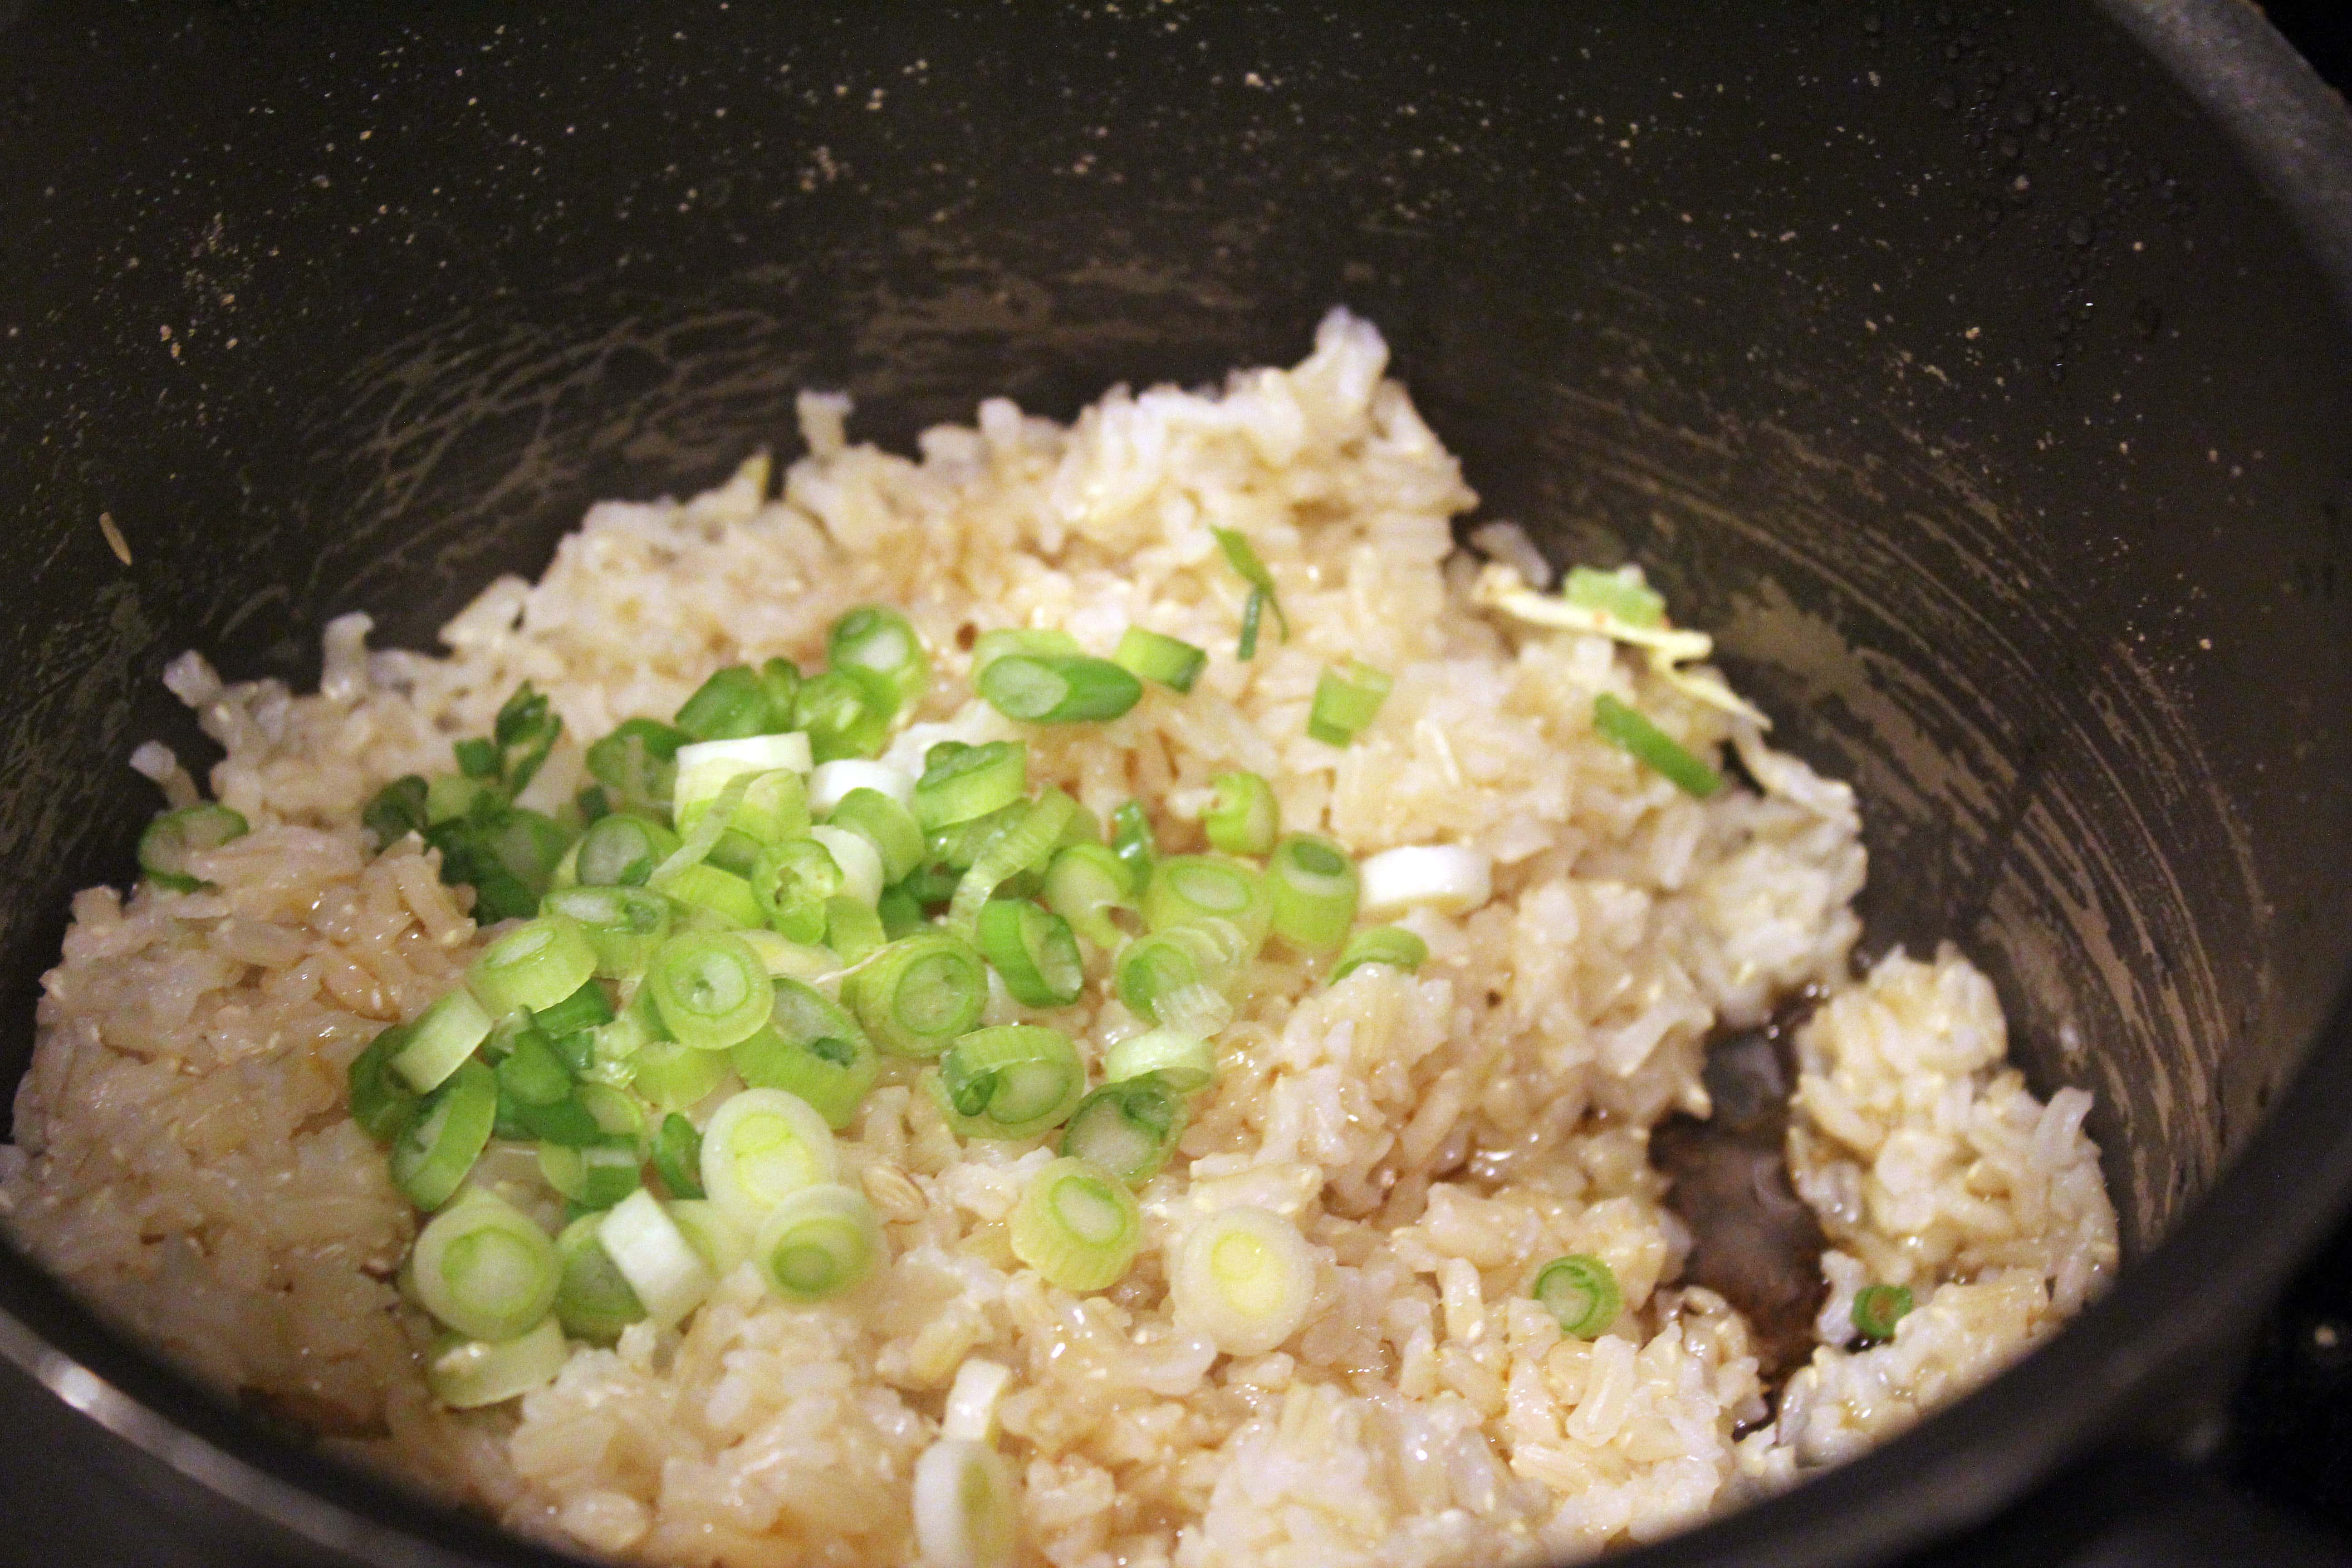 Add scallions to cooked rice